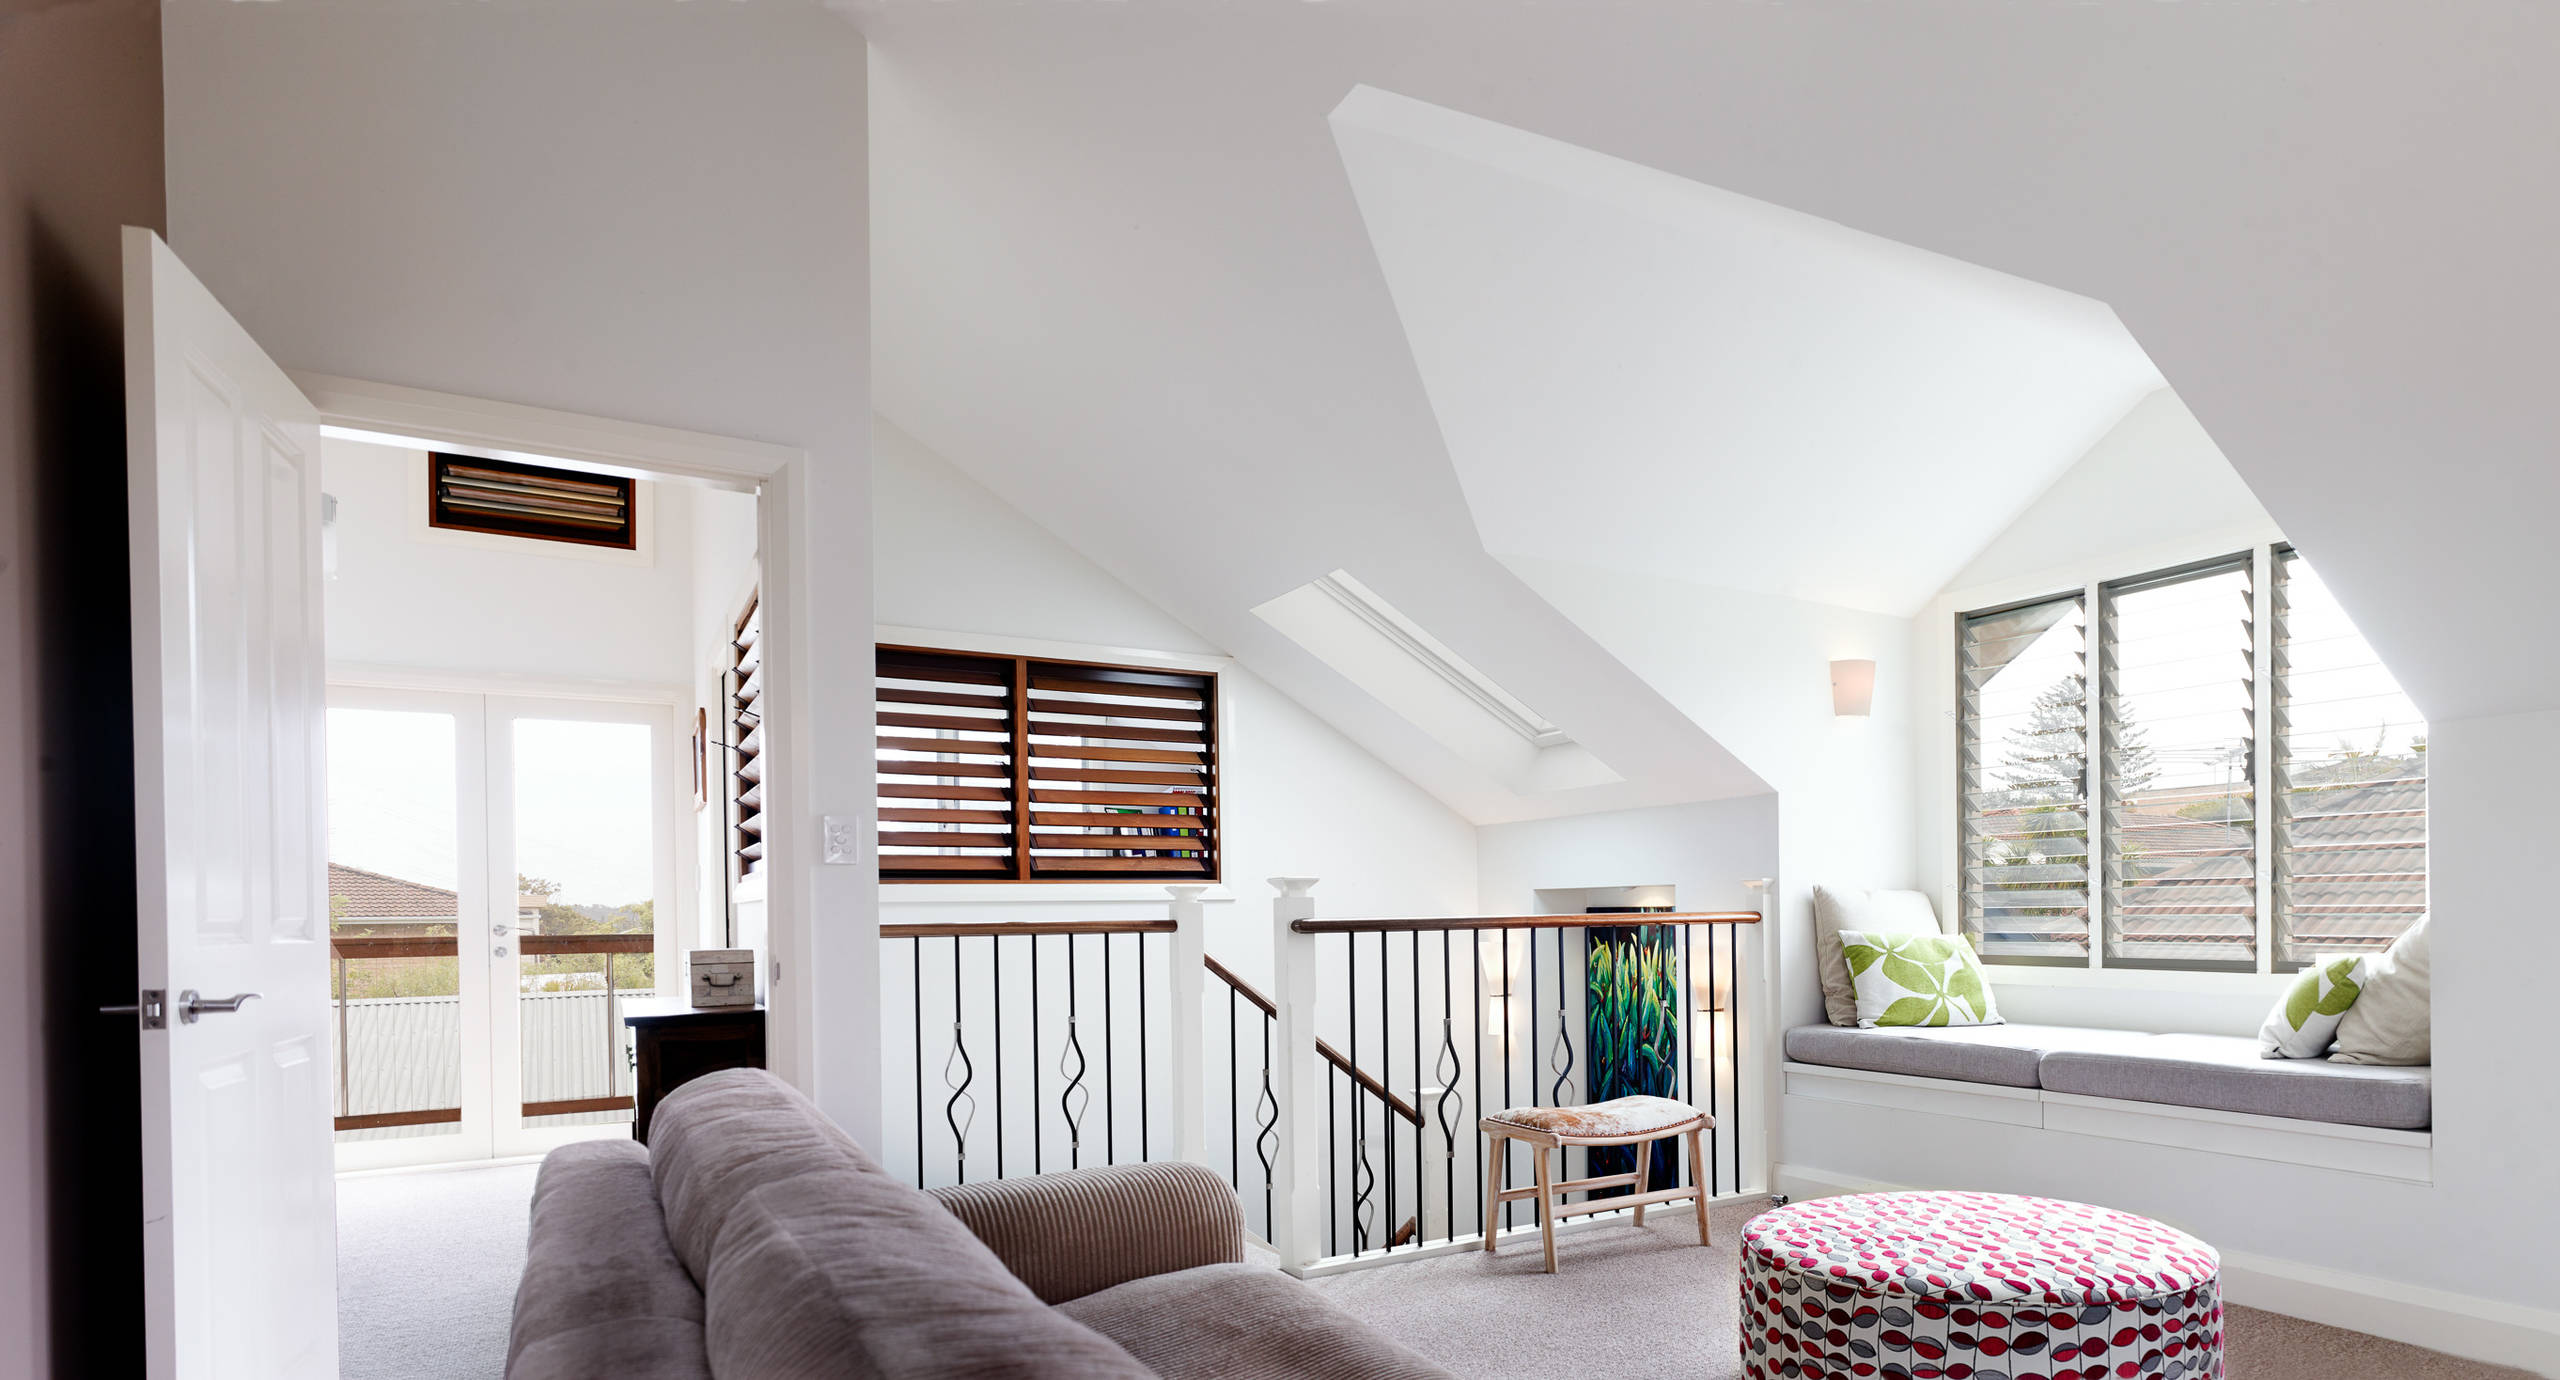 Your Dormer Space with These Inspiring Interior Dormer Ideas